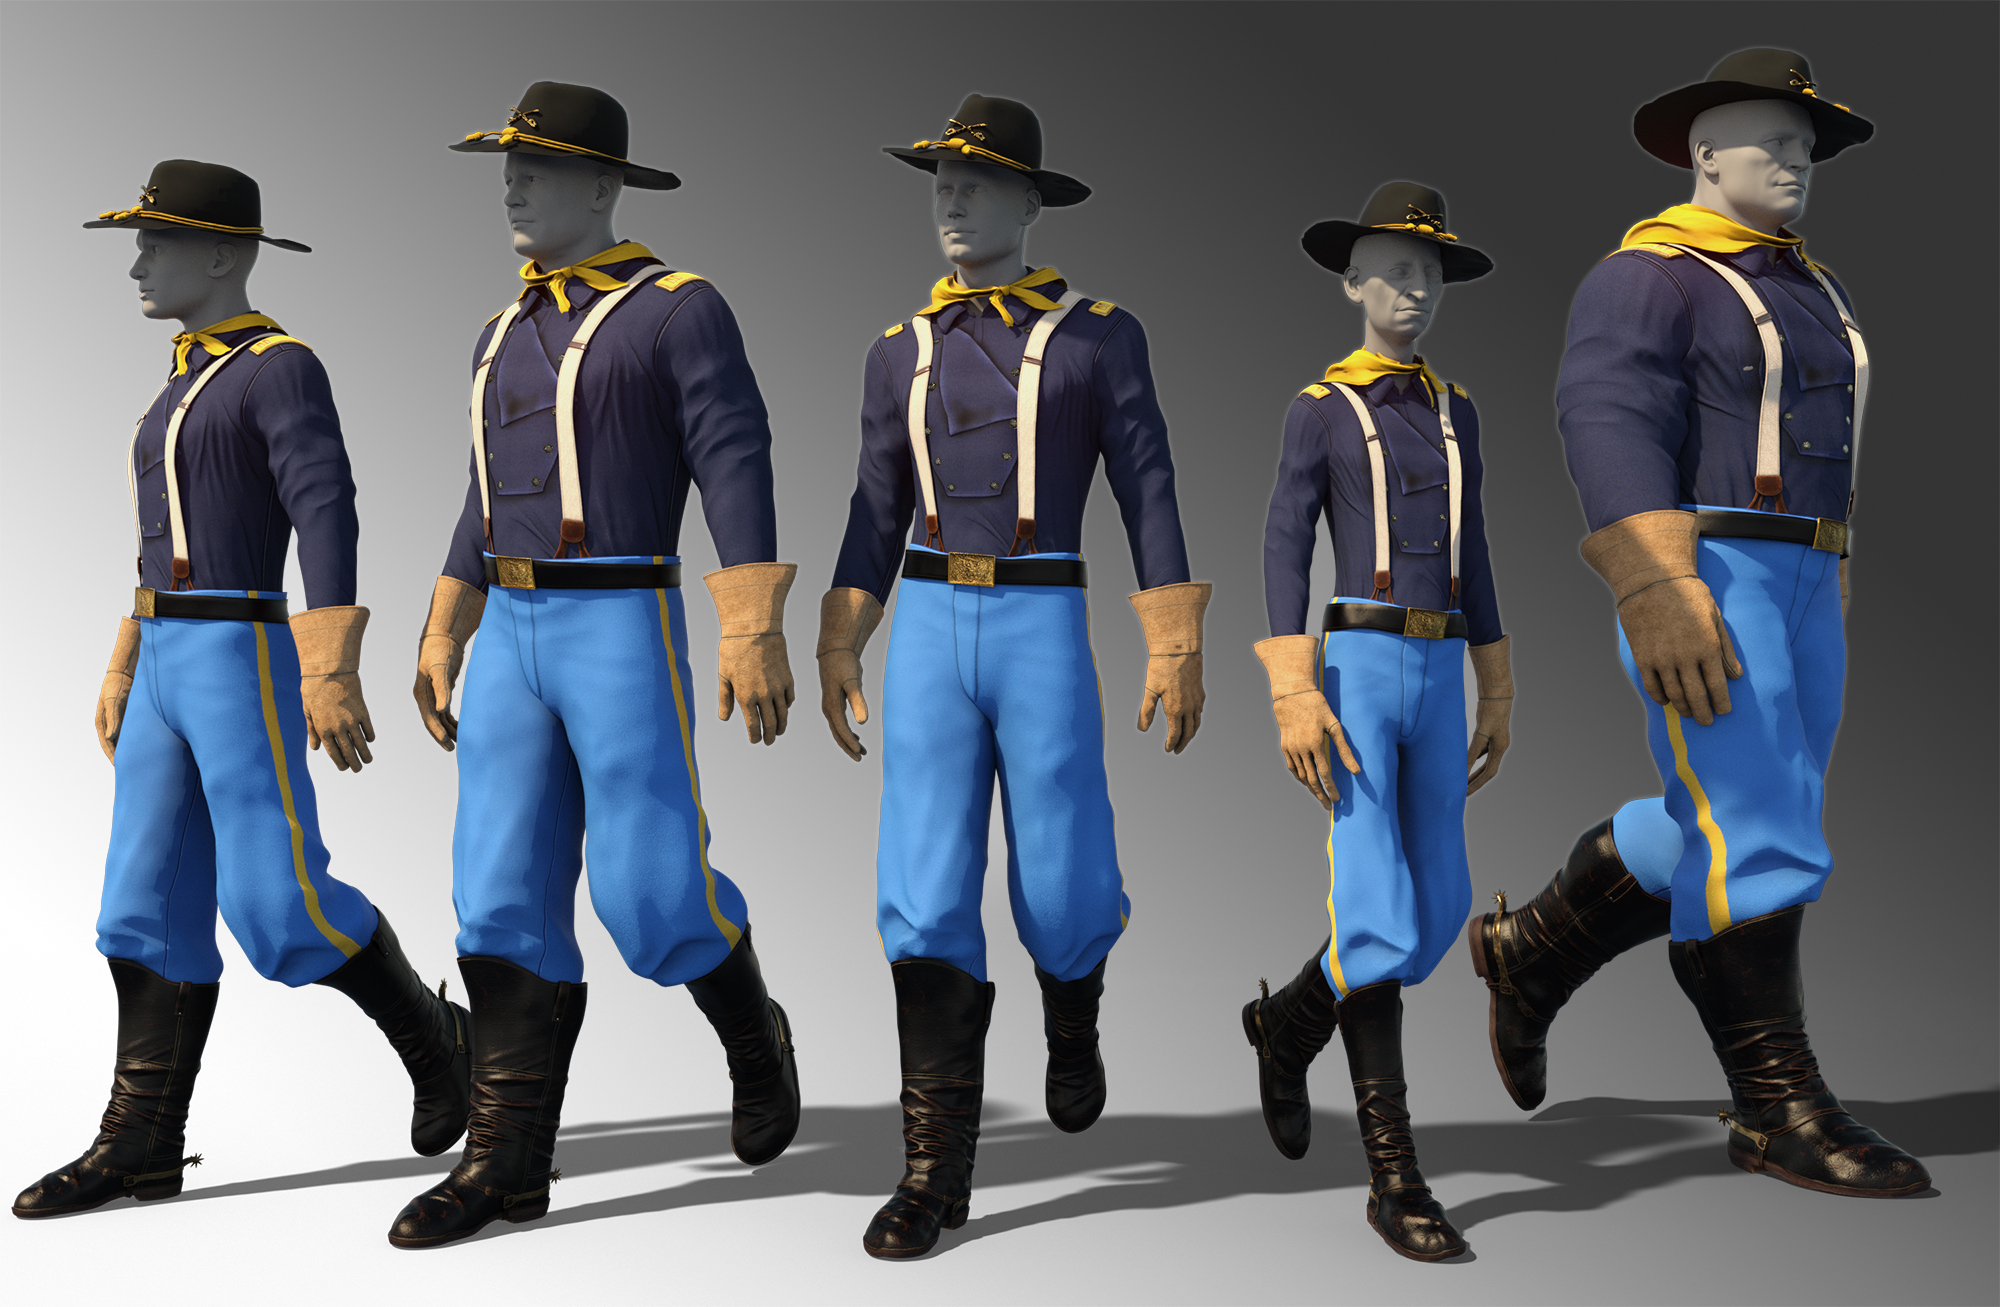 dForce US Cavalry Outfit for Genesis 8 and 8.1 Males by: Meshitup, 3D Models by Daz 3D